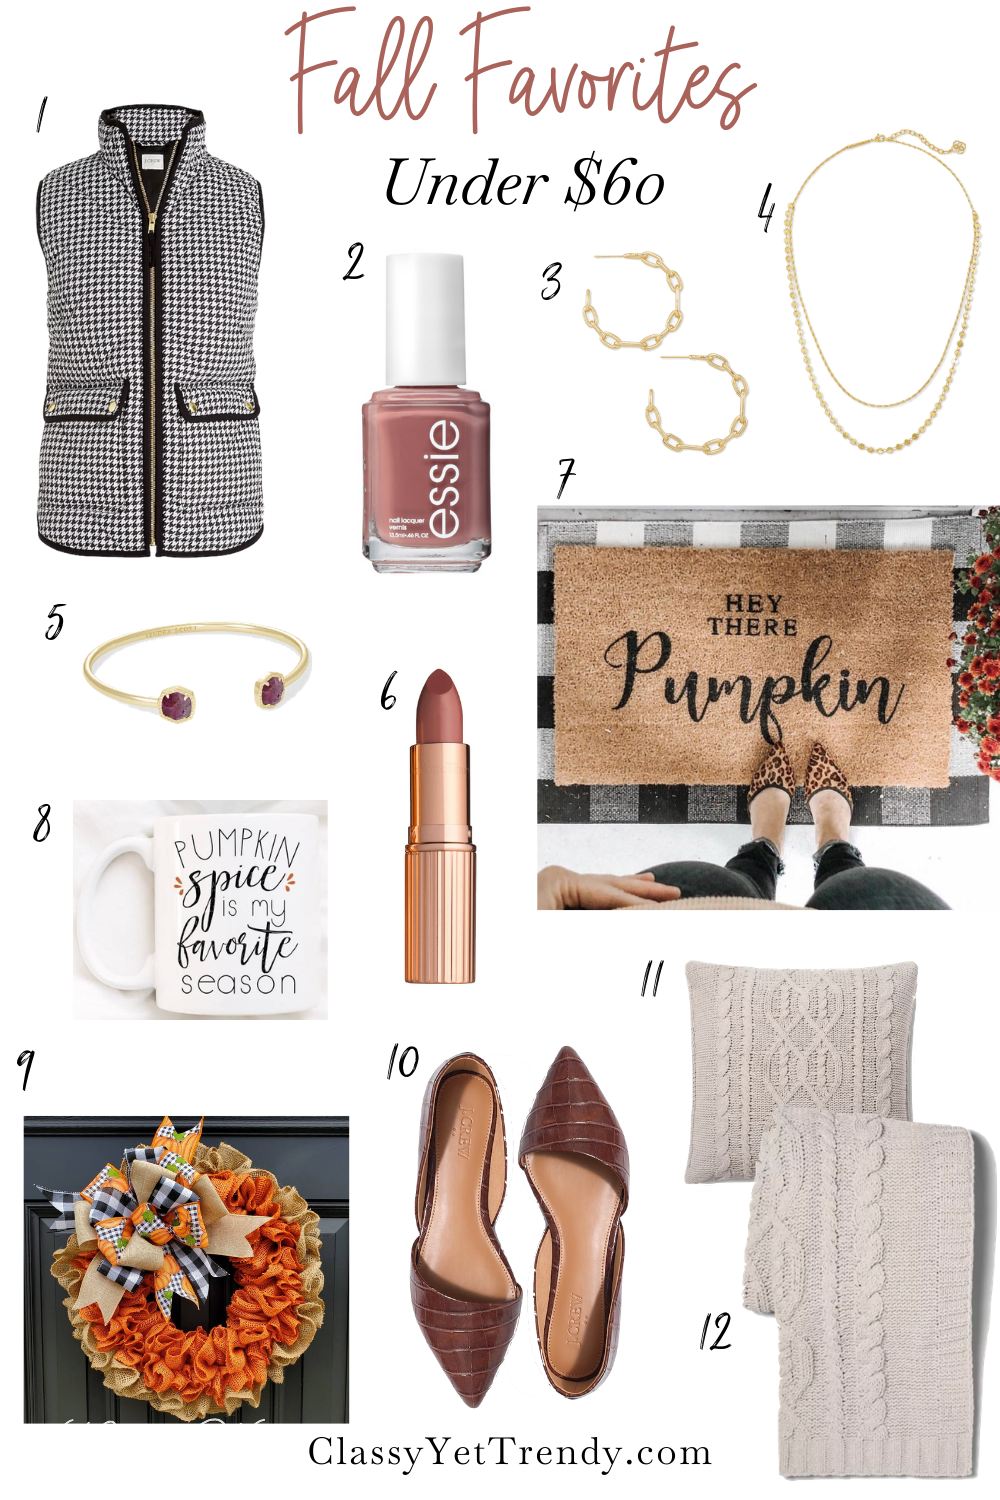 Nordstrom Anniversary Sale Guide 2021 - Southern Curls & Pearls